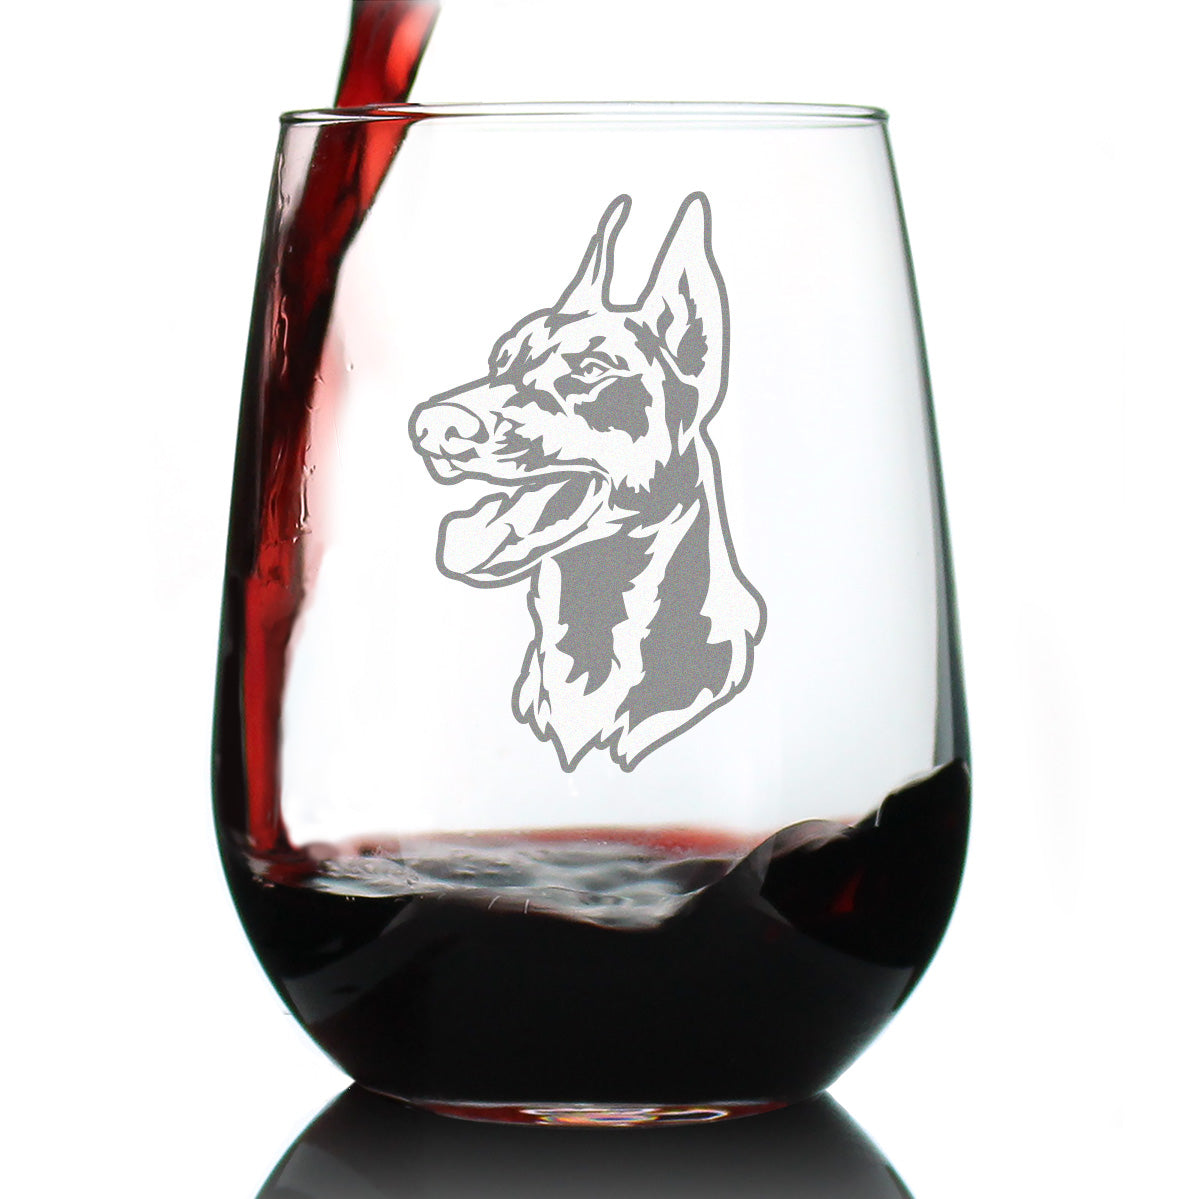 Doberman Face Stemless Wine Glass - Cute Dog Themed Decor and Gifts for Moms &amp; Dads of Pinscher Dobermans - Large 17 Oz